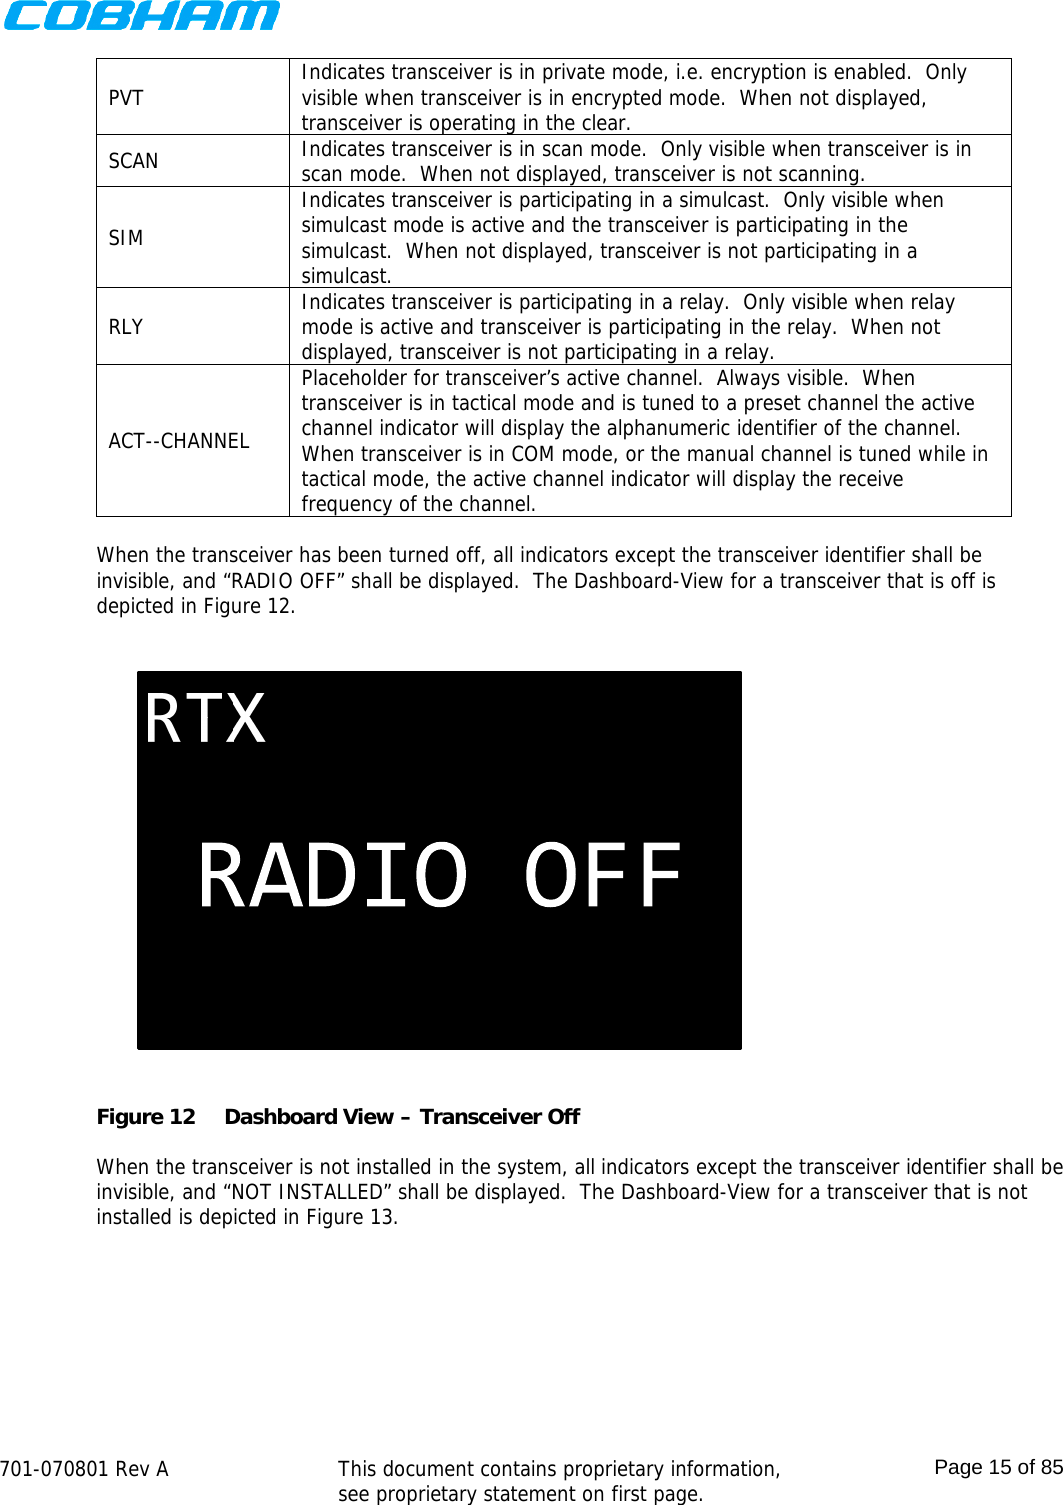    701-070801 Rev A   This document contains proprietary information, see proprietary statement on first page.  Page 15 of 85  PVT  Indicates transceiver is in private mode, i.e. encryption is enabled.  Only visible when transceiver is in encrypted mode.  When not displayed, transceiver is operating in the clear. SCAN  Indicates transceiver is in scan mode.  Only visible when transceiver is in scan mode.  When not displayed, transceiver is not scanning. SIM Indicates transceiver is participating in a simulcast.  Only visible when simulcast mode is active and the transceiver is participating in the simulcast.  When not displayed, transceiver is not participating in a simulcast. RLY  Indicates transceiver is participating in a relay.  Only visible when relay mode is active and transceiver is participating in the relay.  When not displayed, transceiver is not participating in a relay. ACT--CHANNEL Placeholder for transceiver’s active channel.  Always visible.  When transceiver is in tactical mode and is tuned to a preset channel the active channel indicator will display the alphanumeric identifier of the channel.  When transceiver is in COM mode, or the manual channel is tuned while in tactical mode, the active channel indicator will display the receive frequency of the channel.  When the transceiver has been turned off, all indicators except the transceiver identifier shall be invisible, and “RADIO OFF” shall be displayed.  The Dashboard-View for a transceiver that is off is depicted in Figure 12.  Figure 12  Dashboard View – Transceiver Off  When the transceiver is not installed in the system, all indicators except the transceiver identifier shall be invisible, and “NOT INSTALLED” shall be displayed.  The Dashboard-View for a transceiver that is not installed is depicted in Figure 13. 